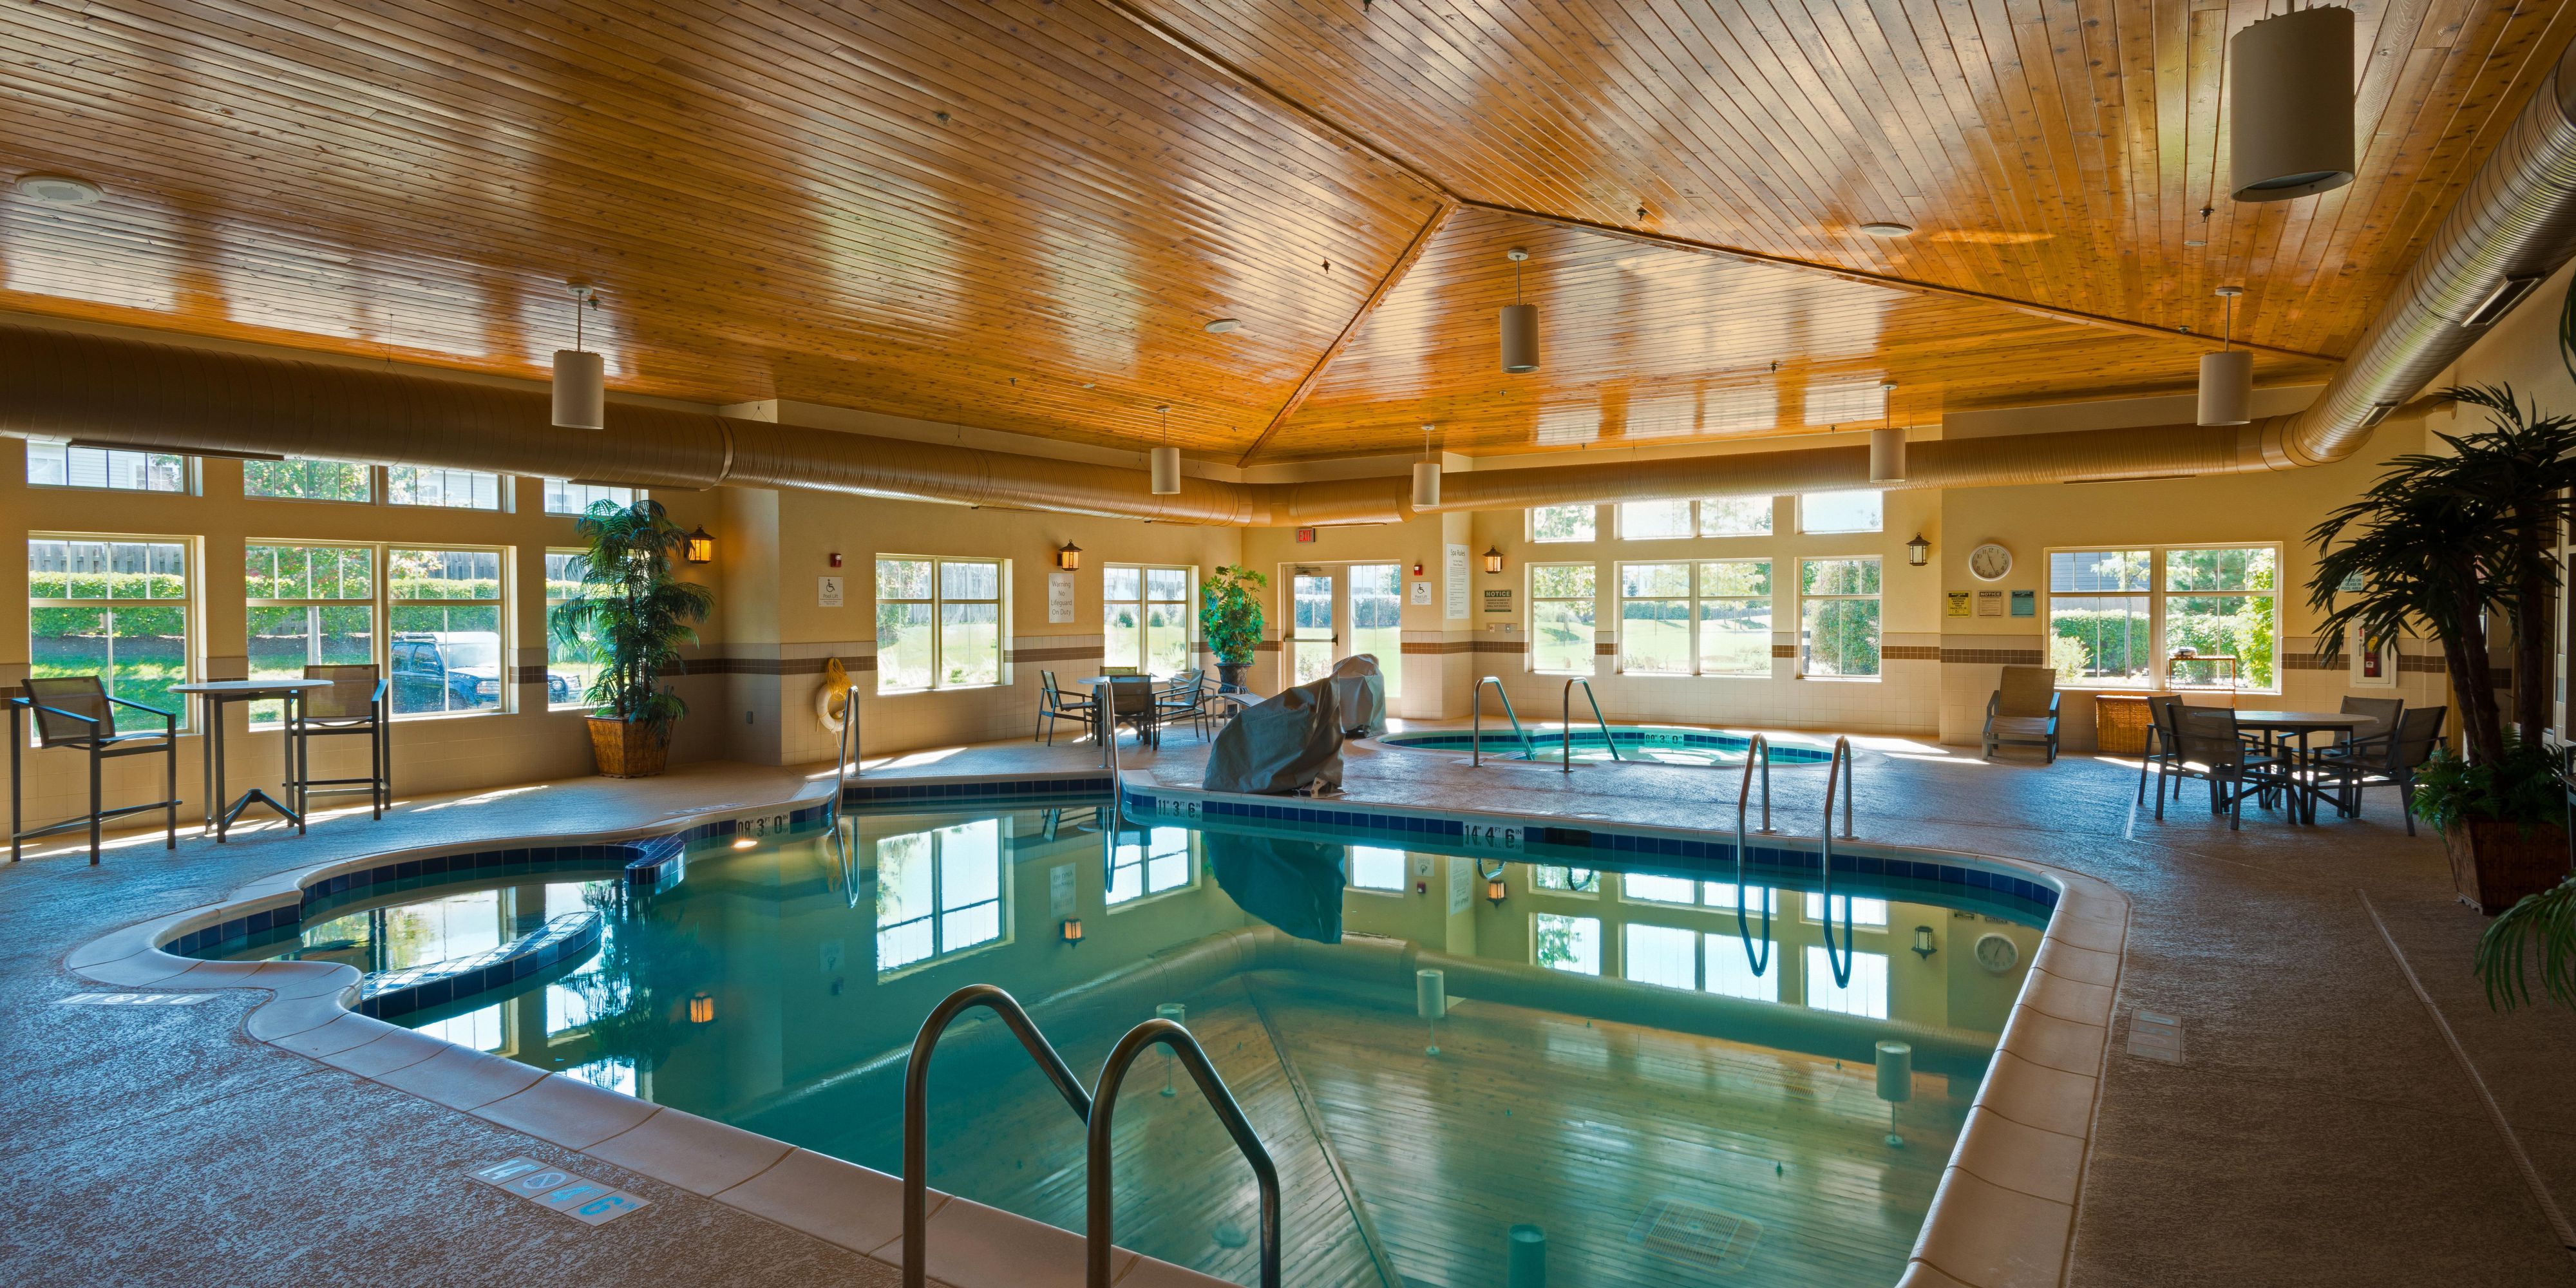 Swim or just relax in our indoor pool and whirlpool